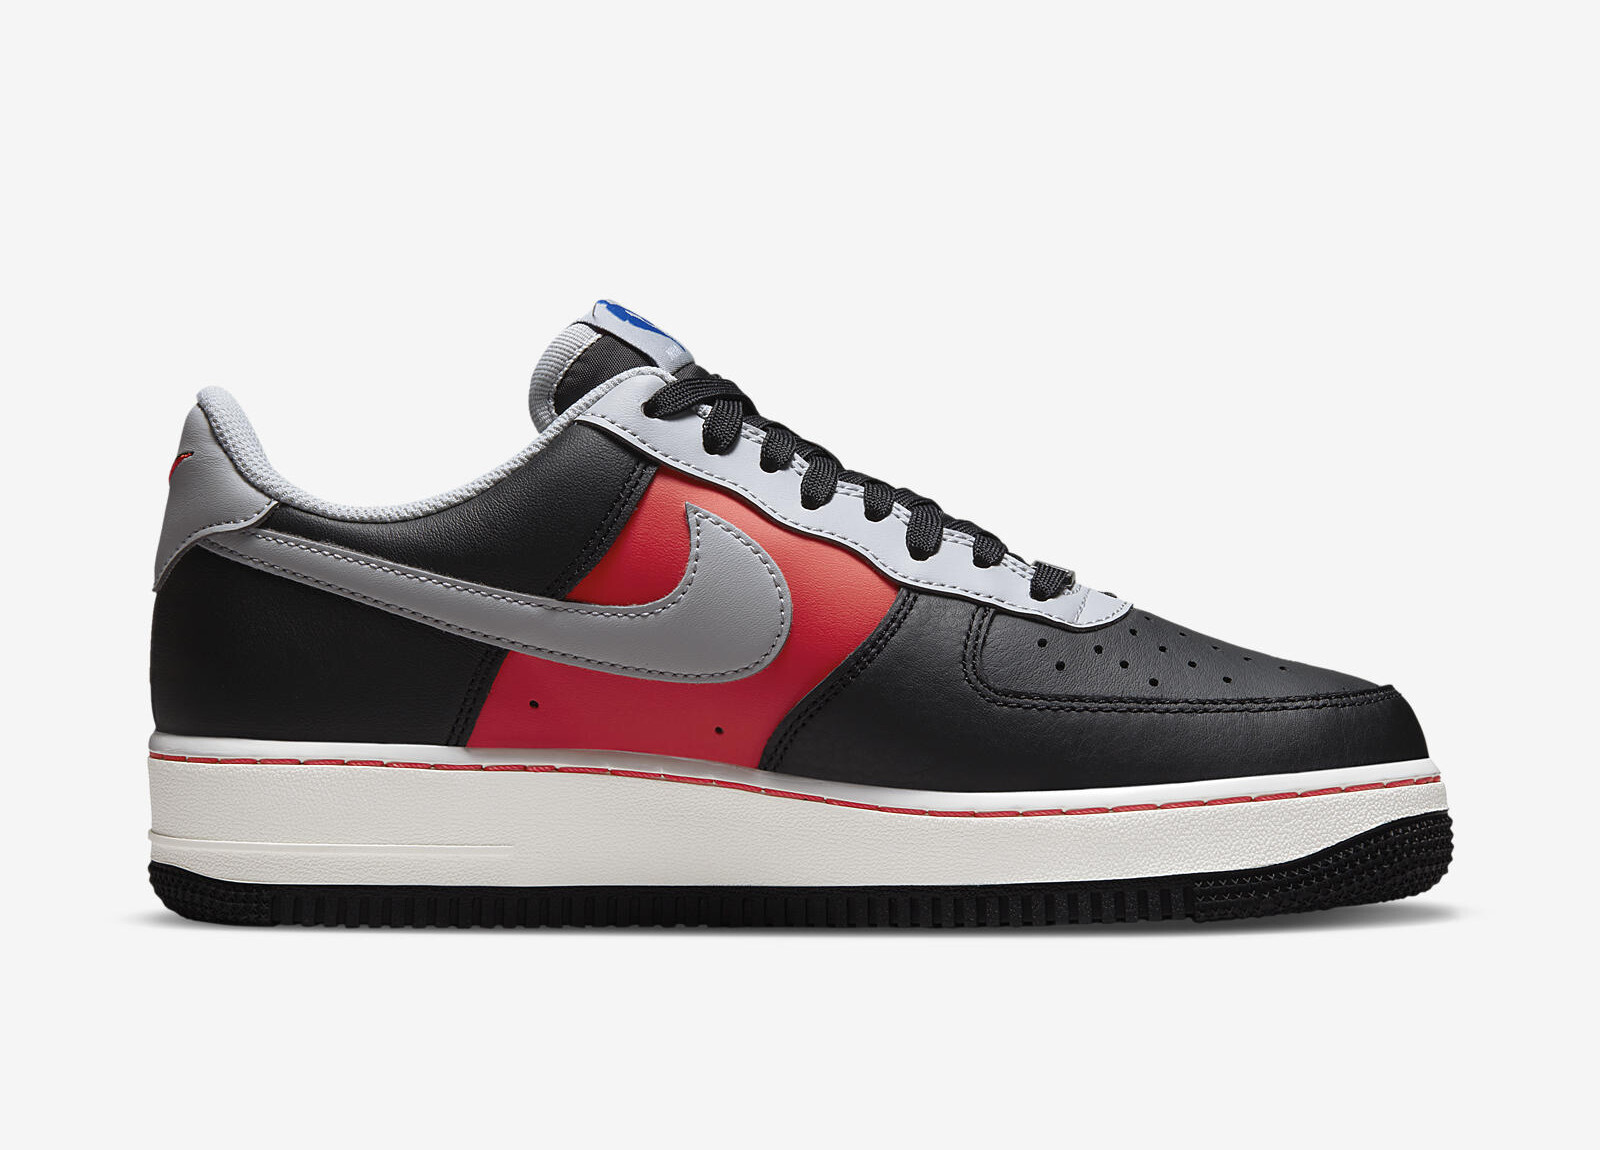 NBA x Nike
Air Force 1 Low
75th Anniversary
« Chile Red »